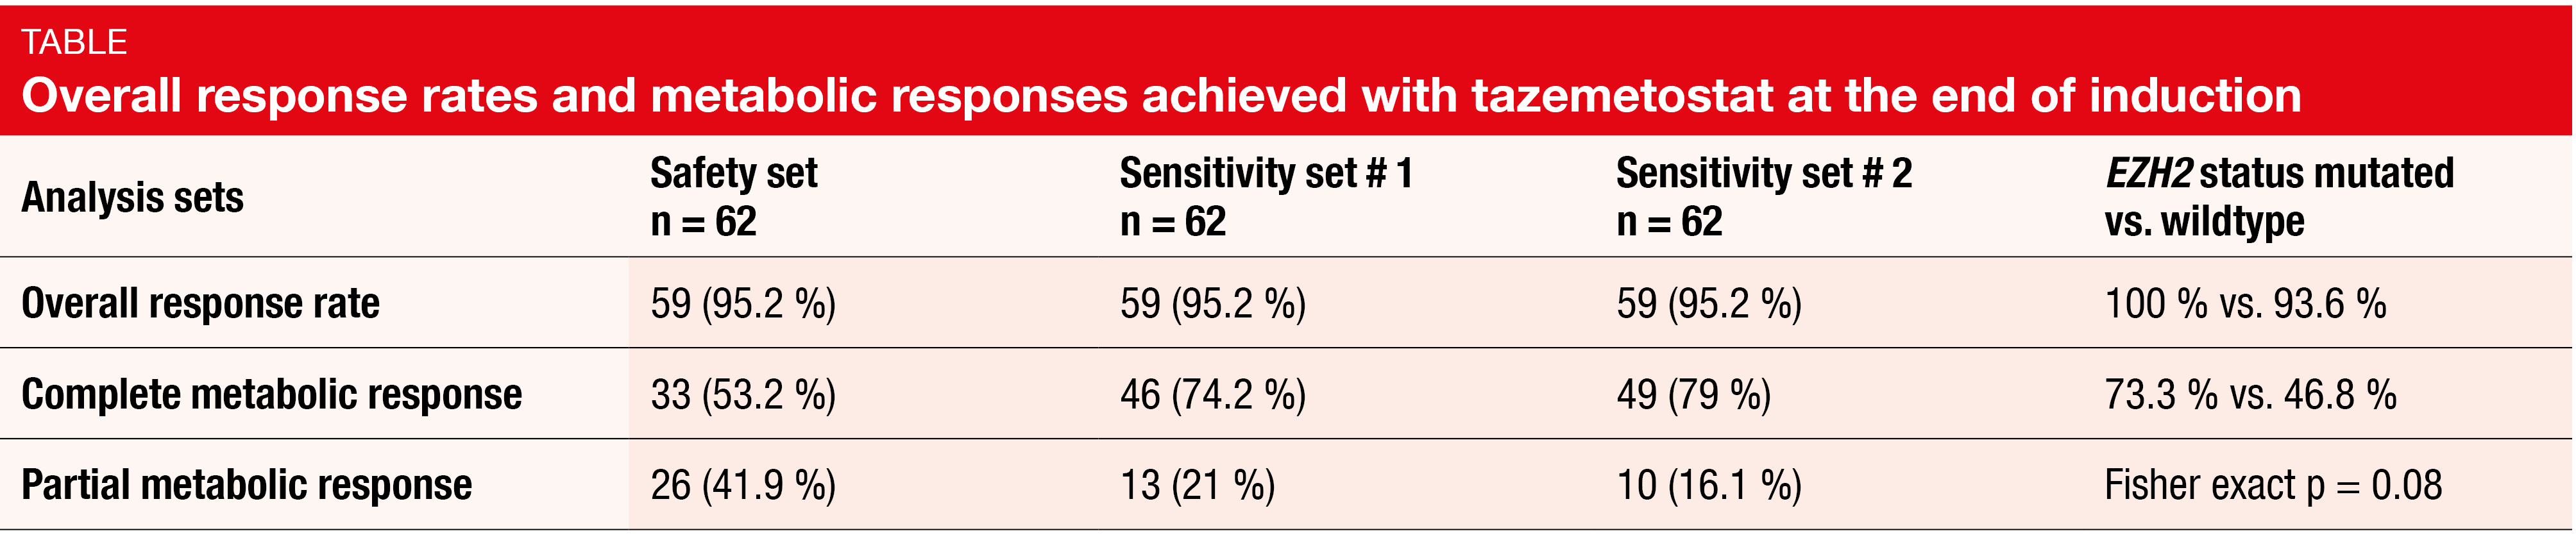 Table Overall response rates and metabolic responses achieved with tazemetostat at the end of induction